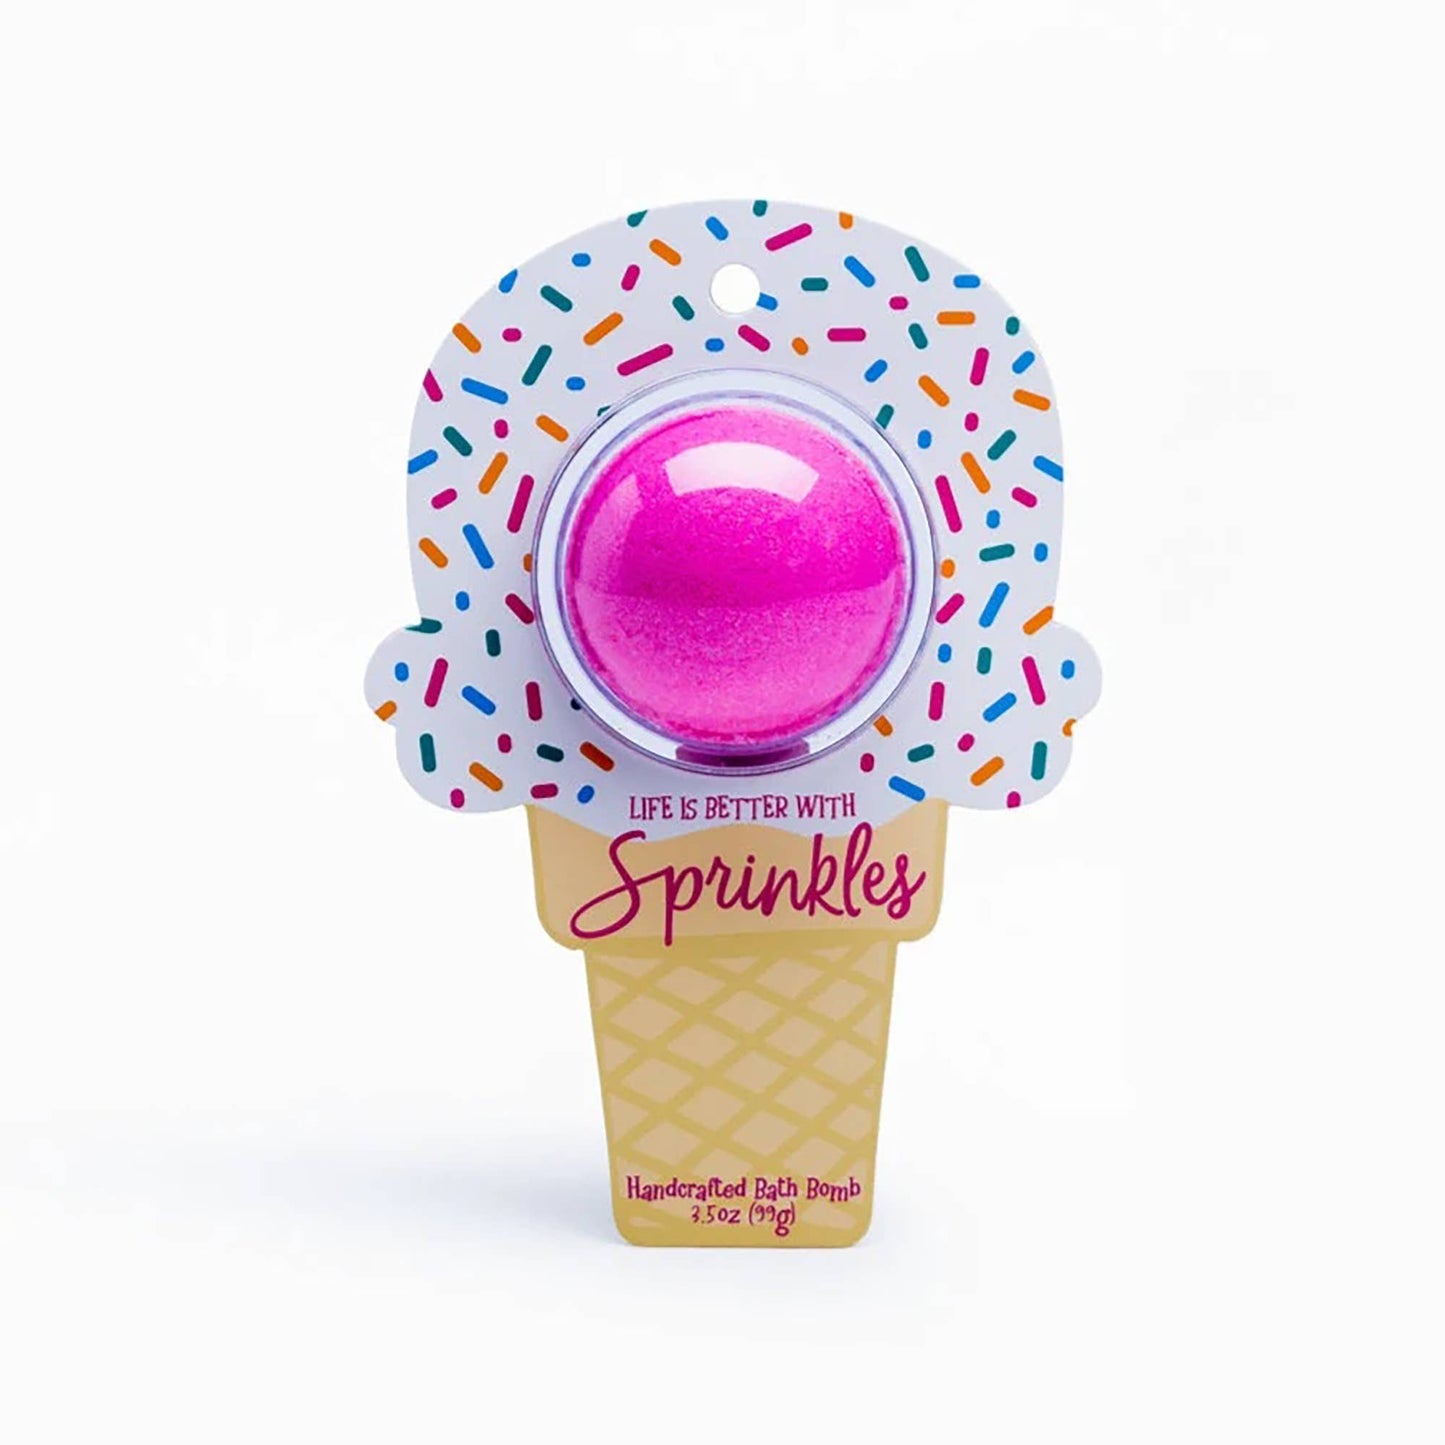 Life is Better with Sprinkles Ice Cream Clamshell Bath Bomb